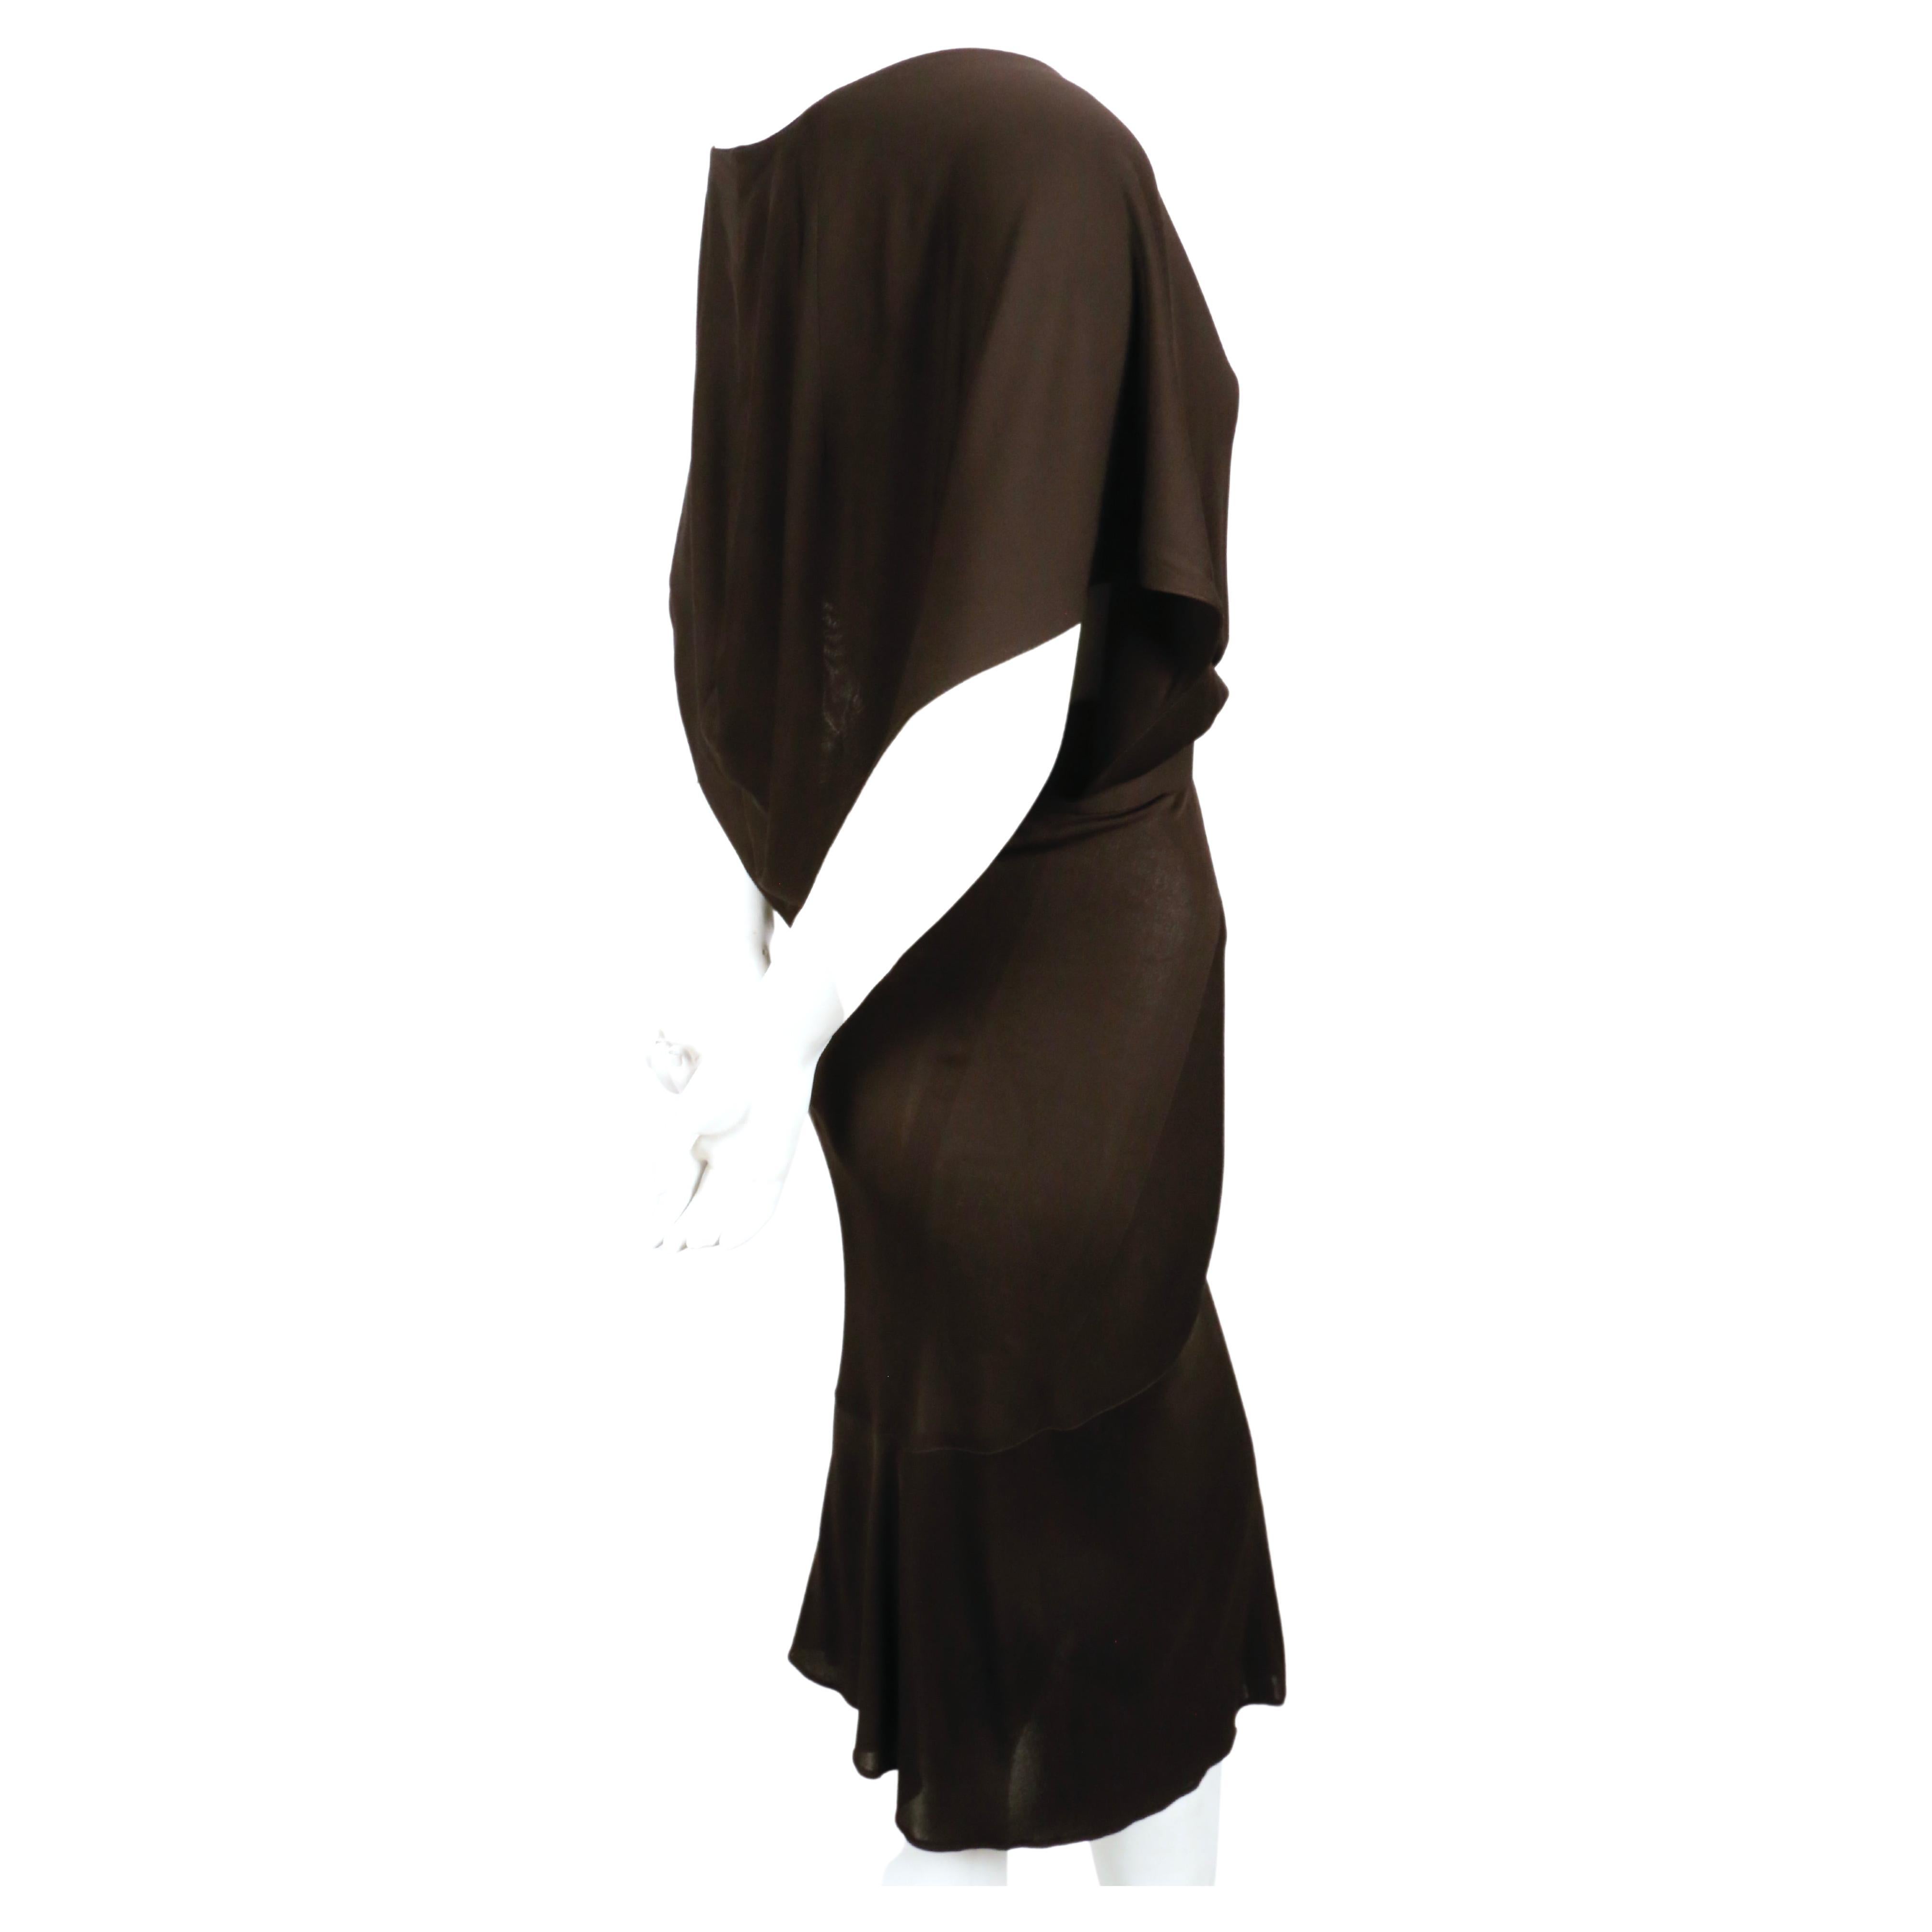 very rare 1984 AZZEDINE ALAIA iconic hooded jersey dress For Sale 1